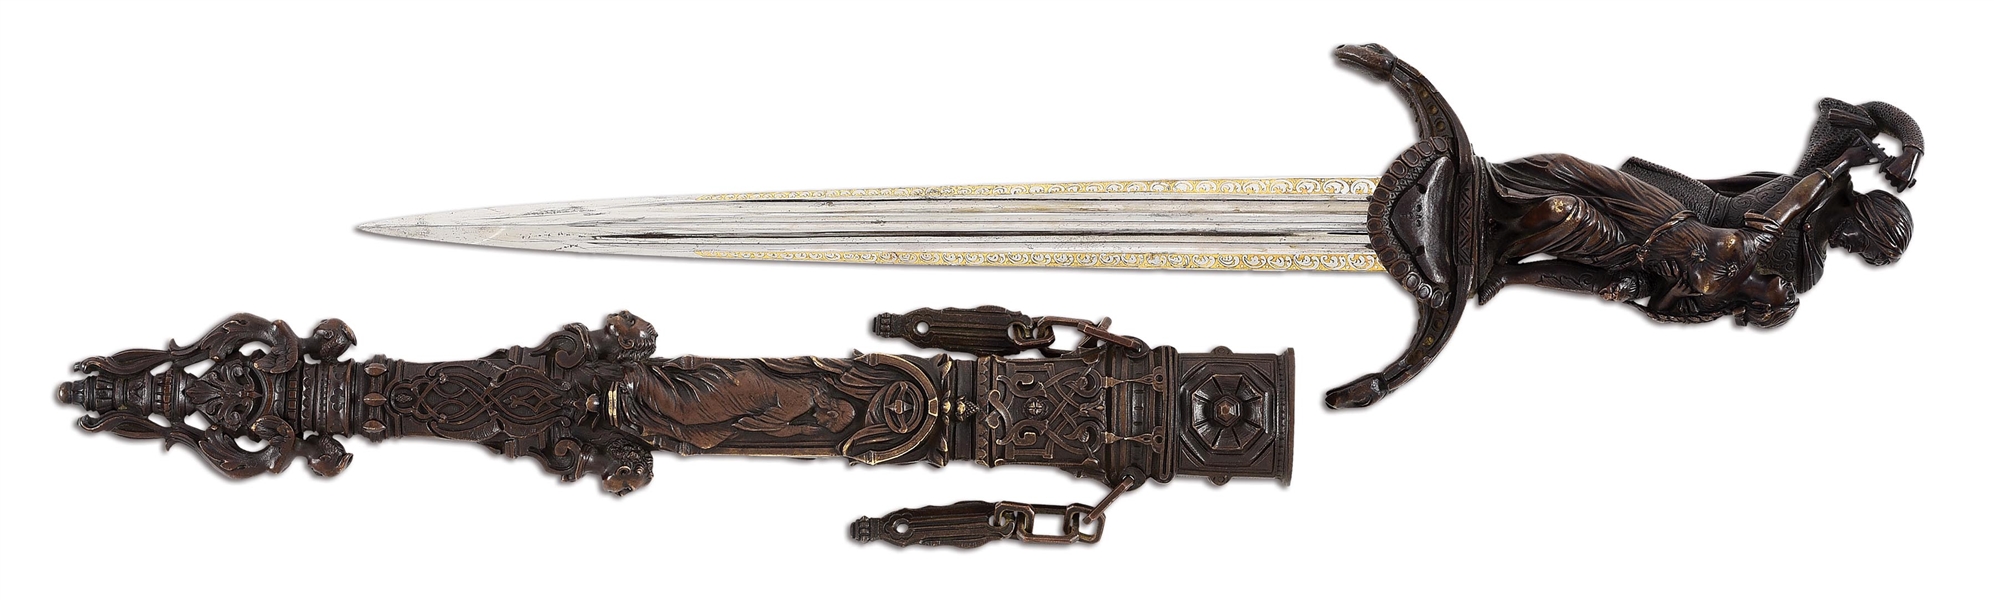 ATTRACTIVE 19TH CENTURY ROMANTIC DAGGER WITH GOLD WASHED BLADE AND DEPICTION OF IAGO KILLING EMILIA FROM OTHELLO.